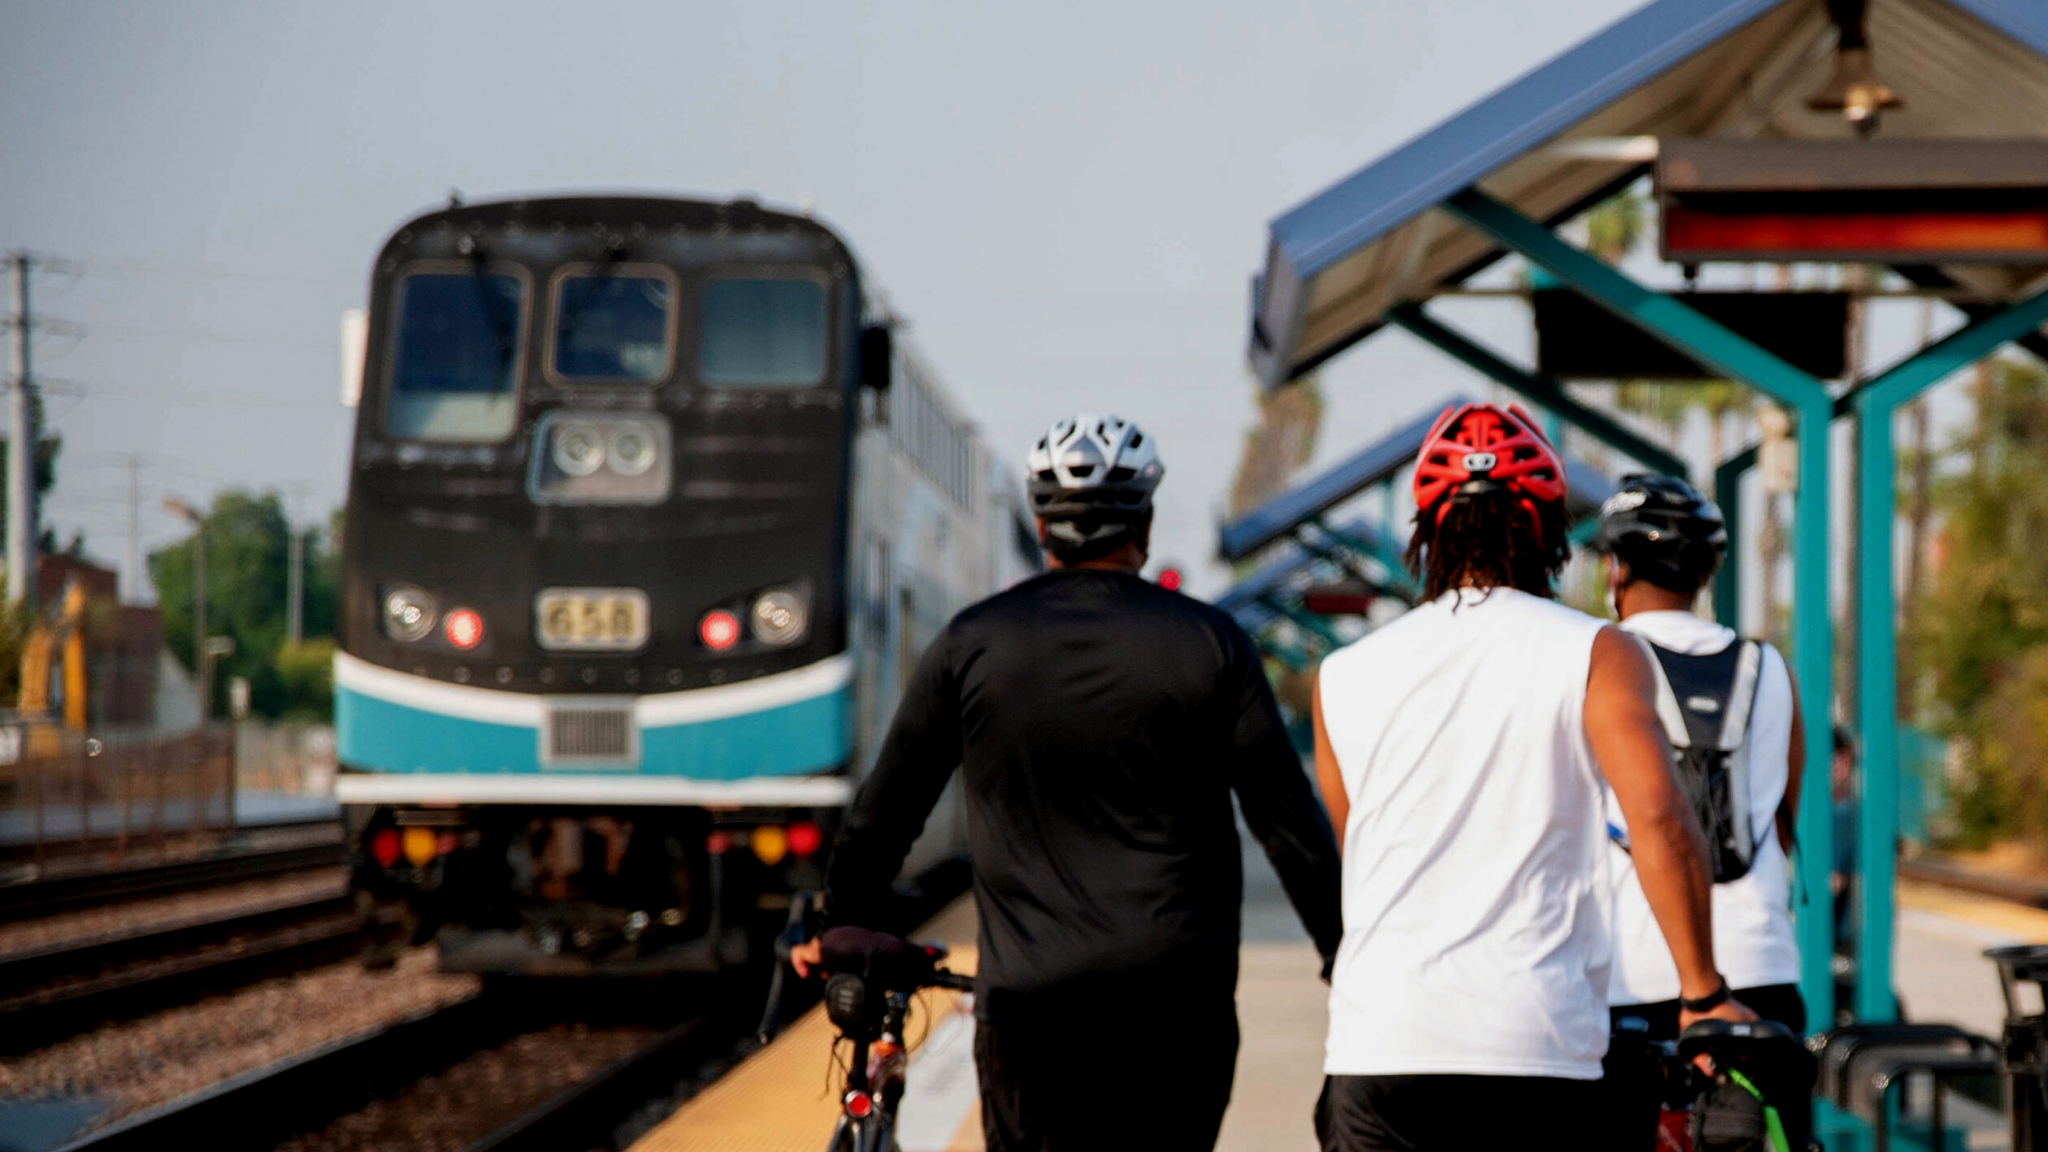 Metrolink train approaching with cyclists in the forefront